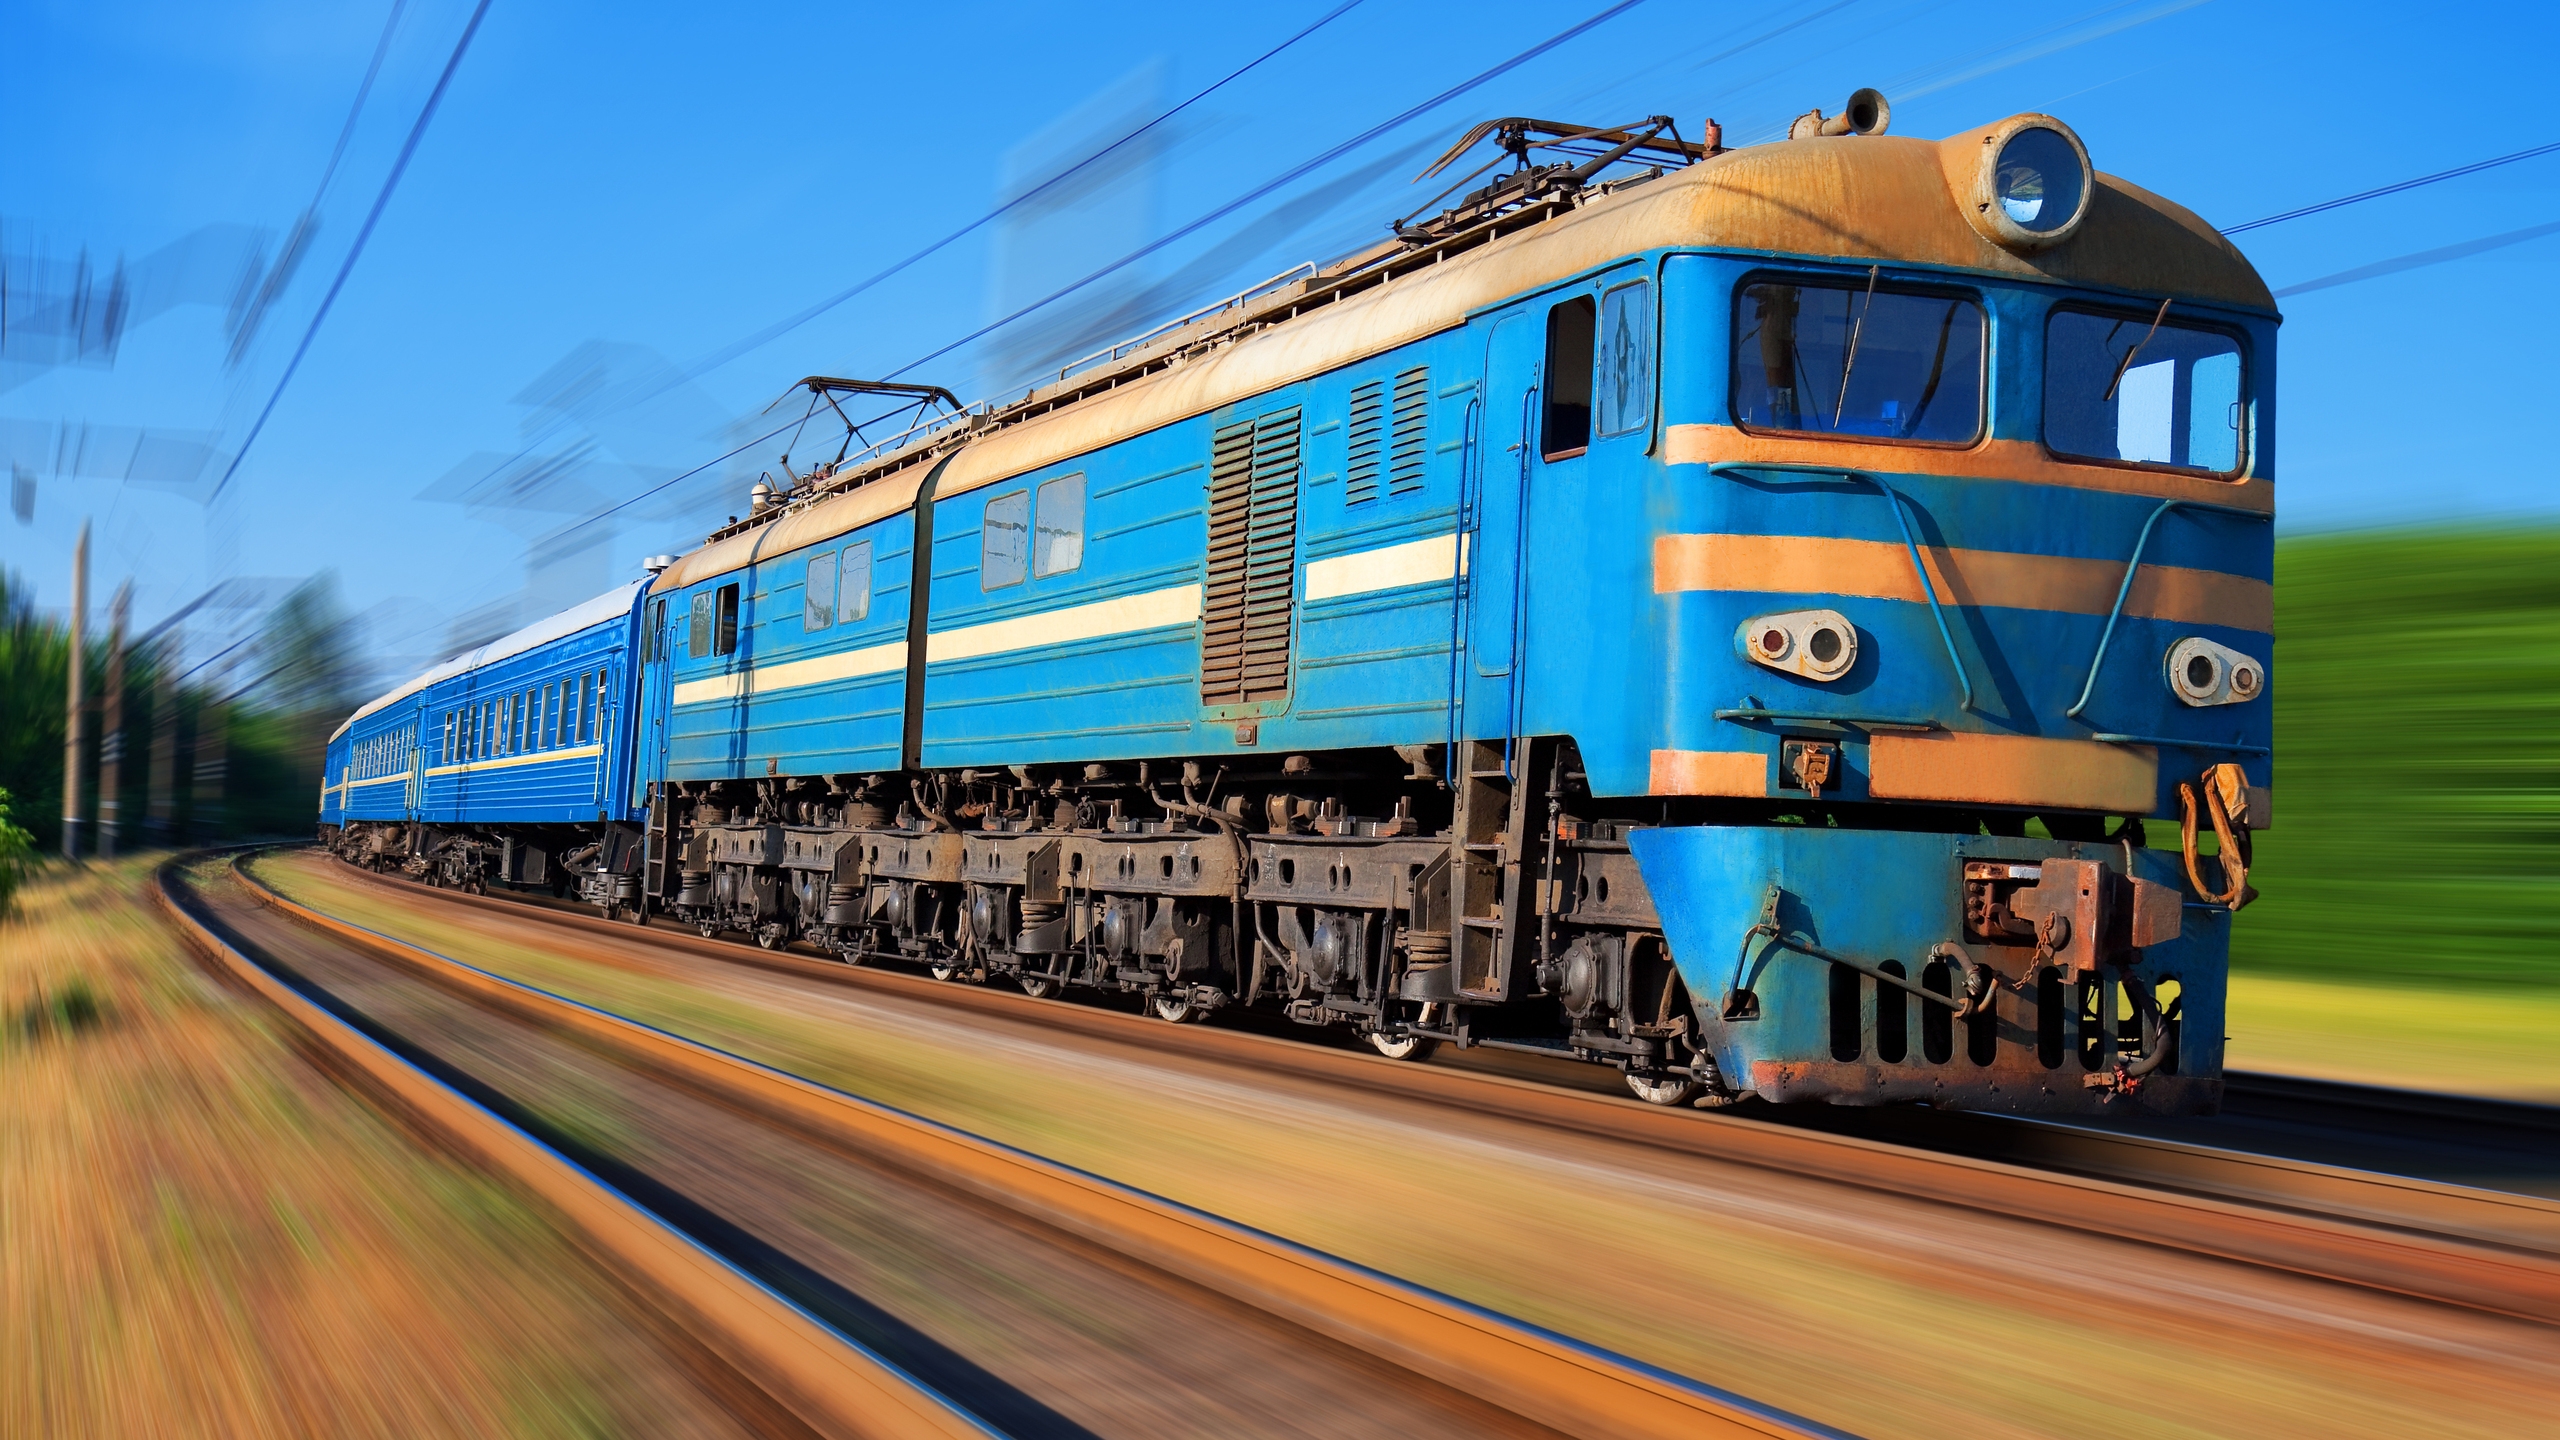 Old Blue Train for 2560x1440 HDTV resolution